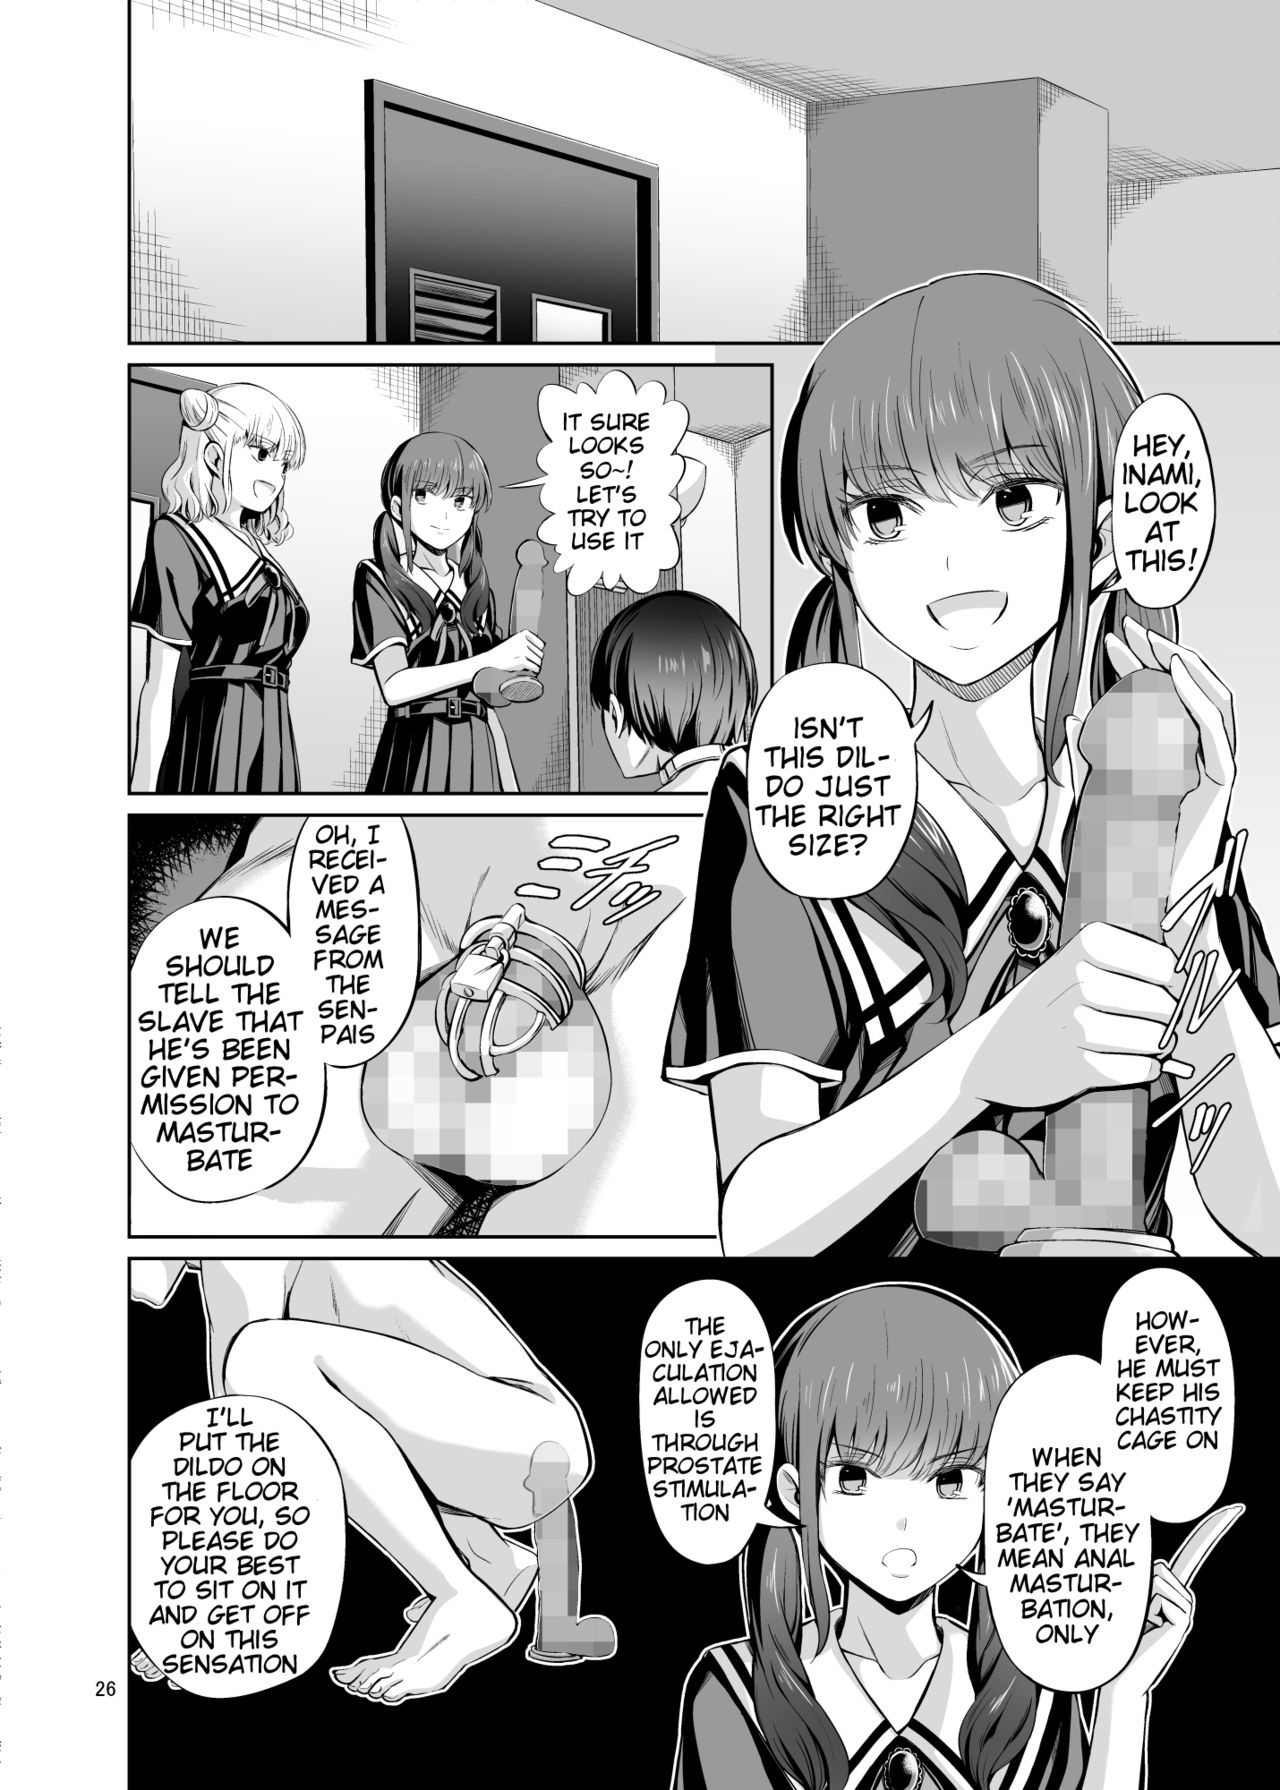 [Yamahata Rian] Tensuushugi no Kuni Kouhen | A Country Based on Point System Sequel [English] [Esoteric_Autist, klow82] page 28 full